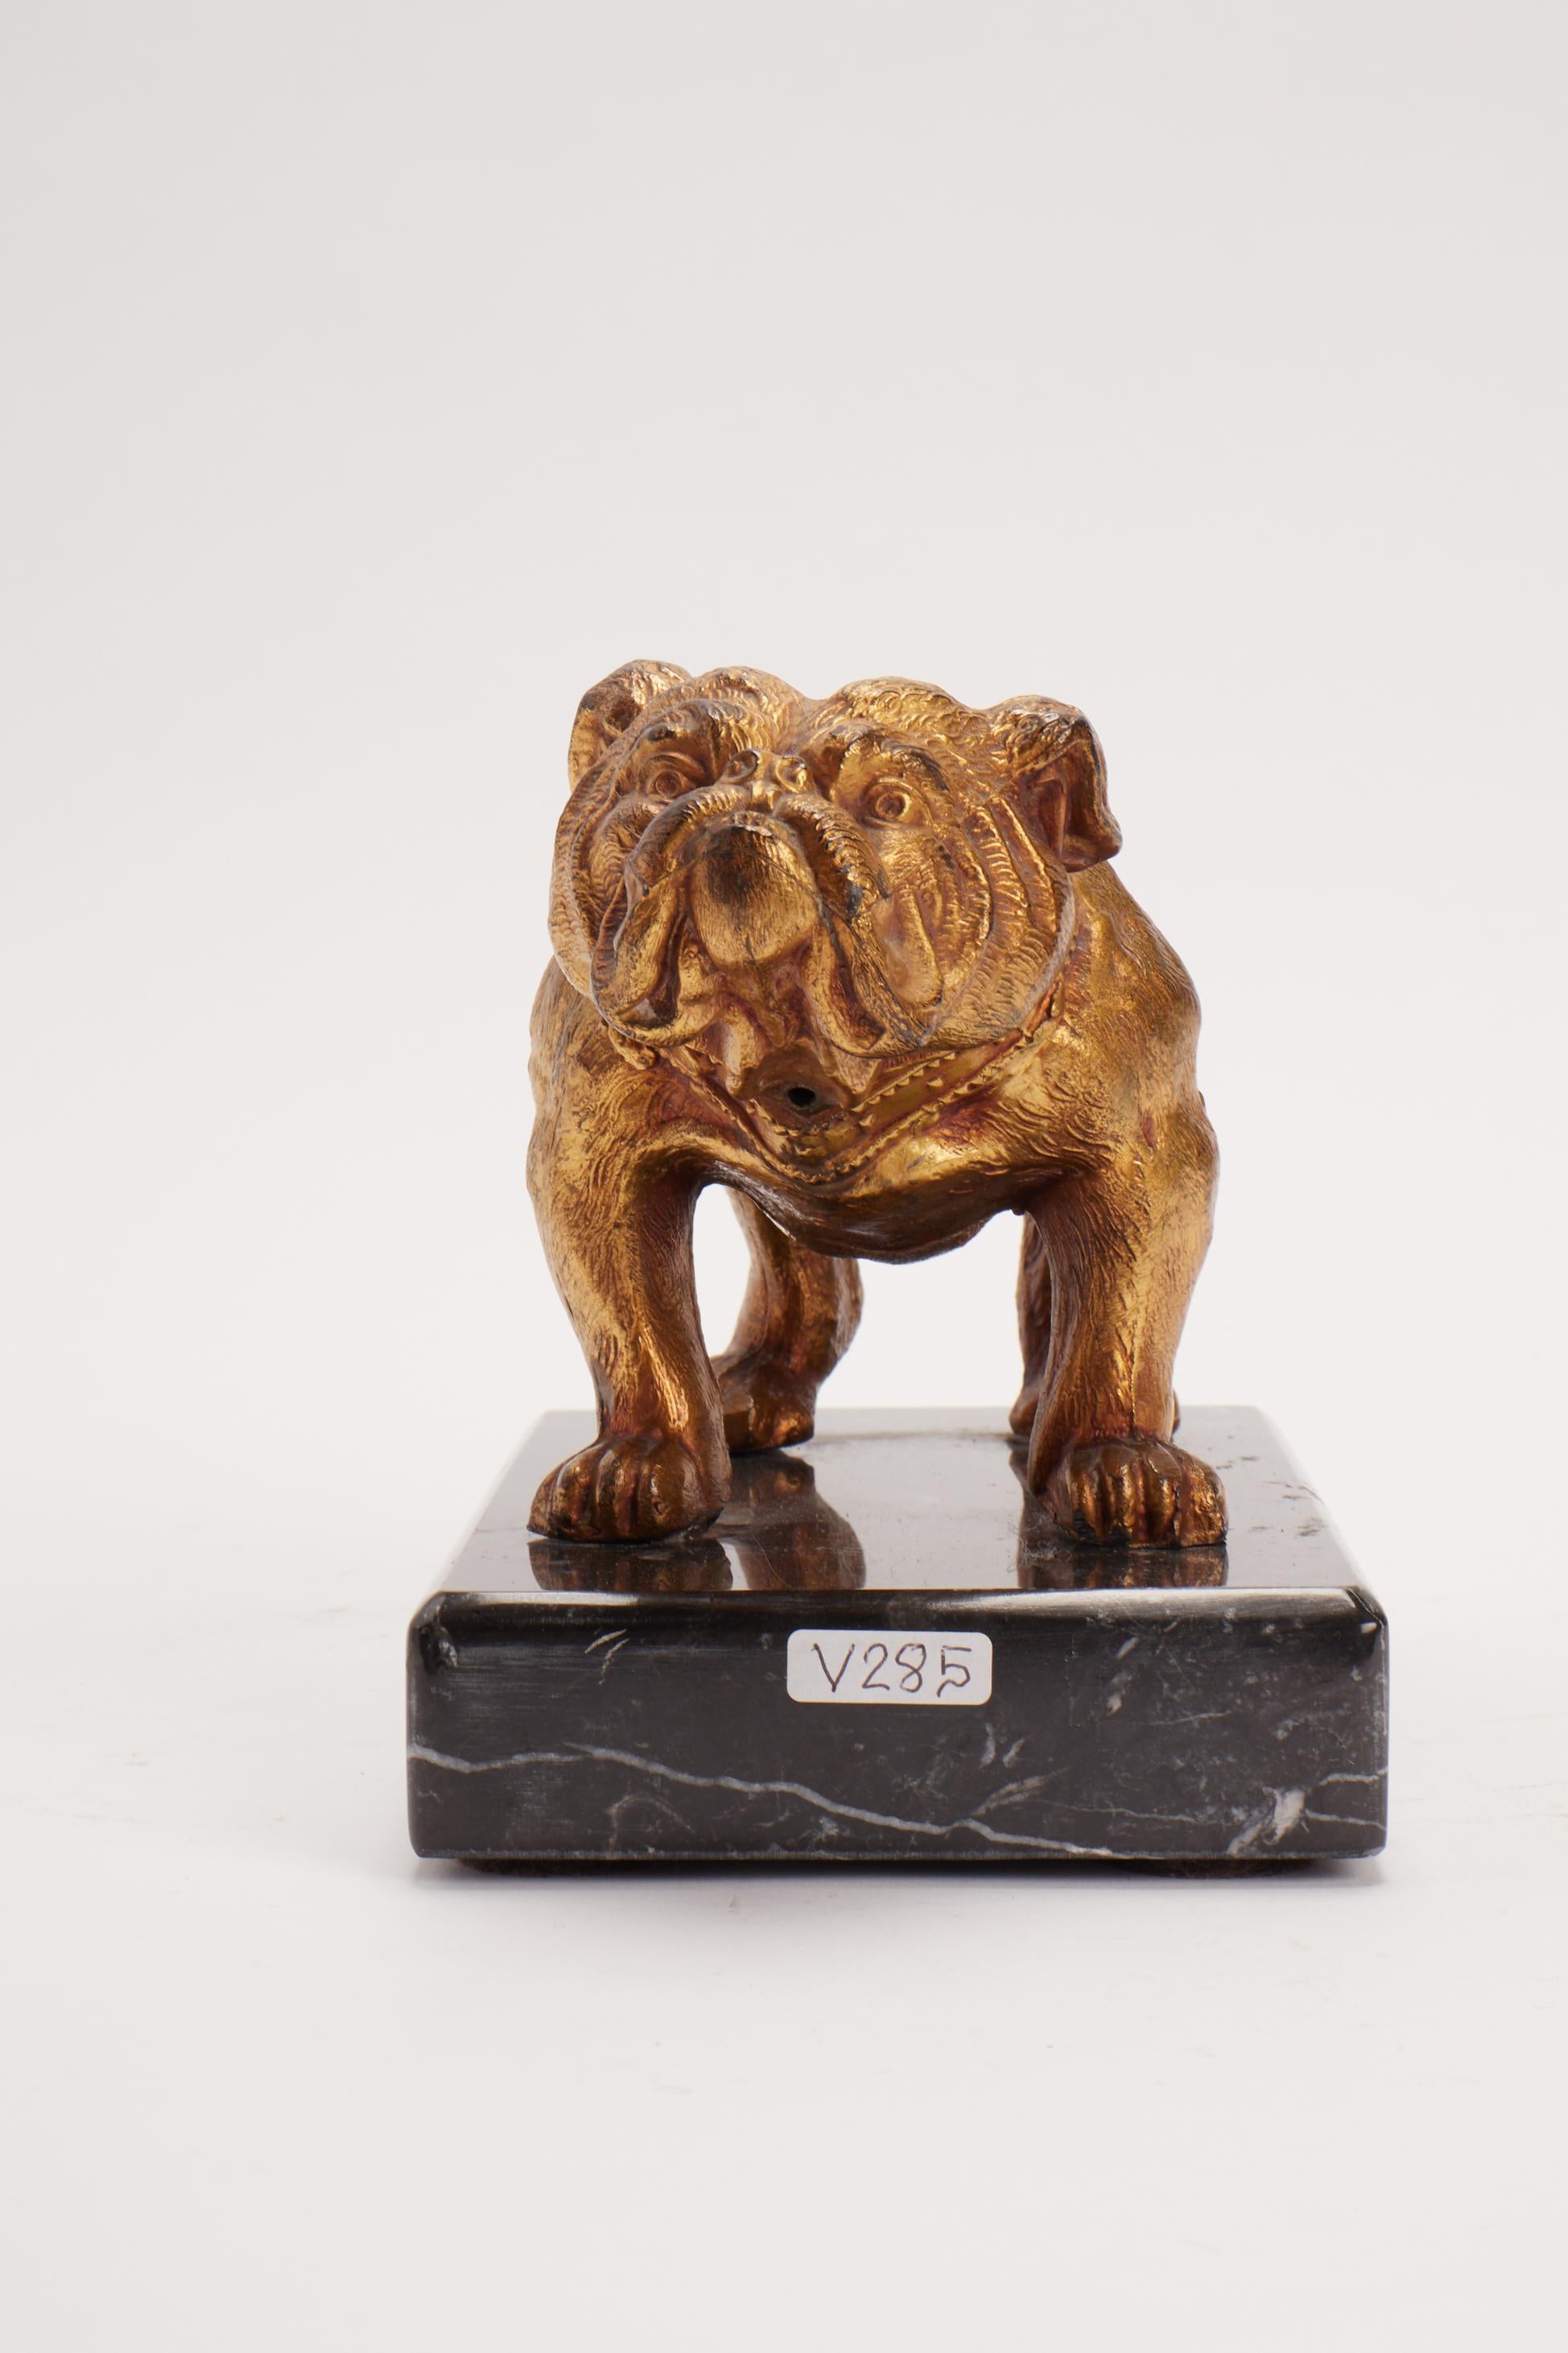 : A Painted white metal sculpture depicting an English Bulldog over a Black veined marble. Signed J.B. America 1890 ca.